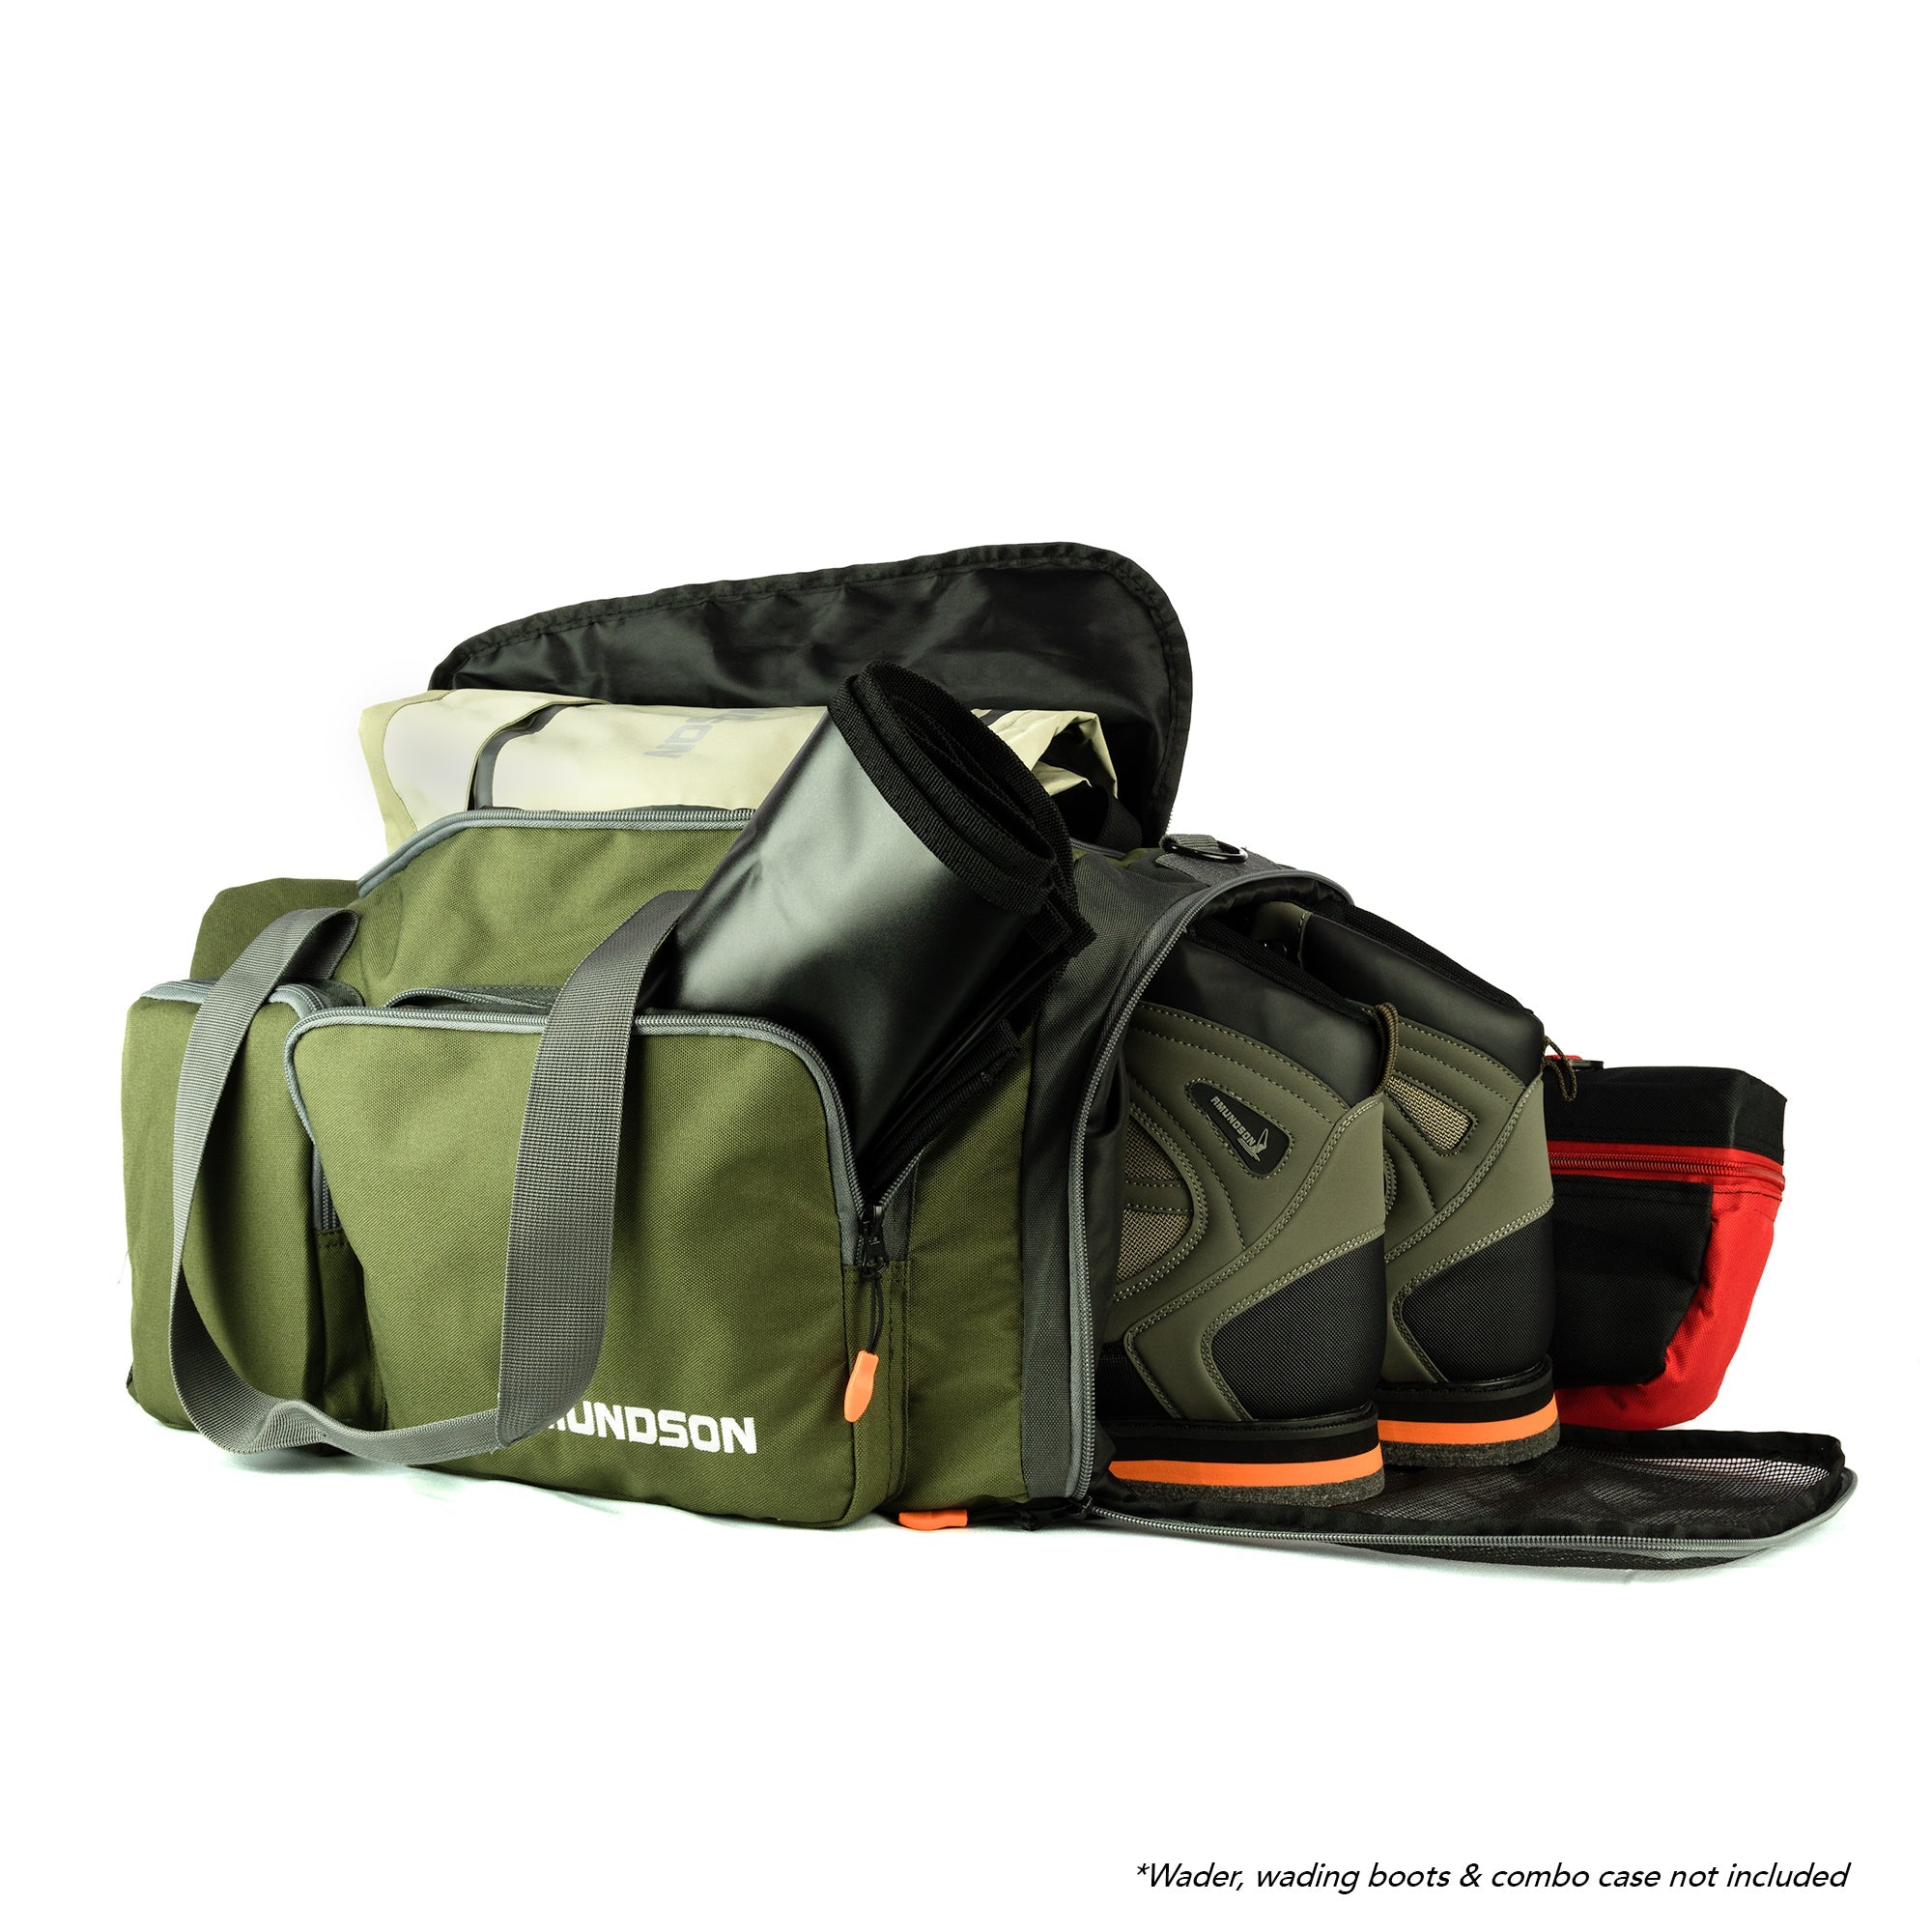 Amundson Wader Bag - 40L in Green from The Fishin' Hole